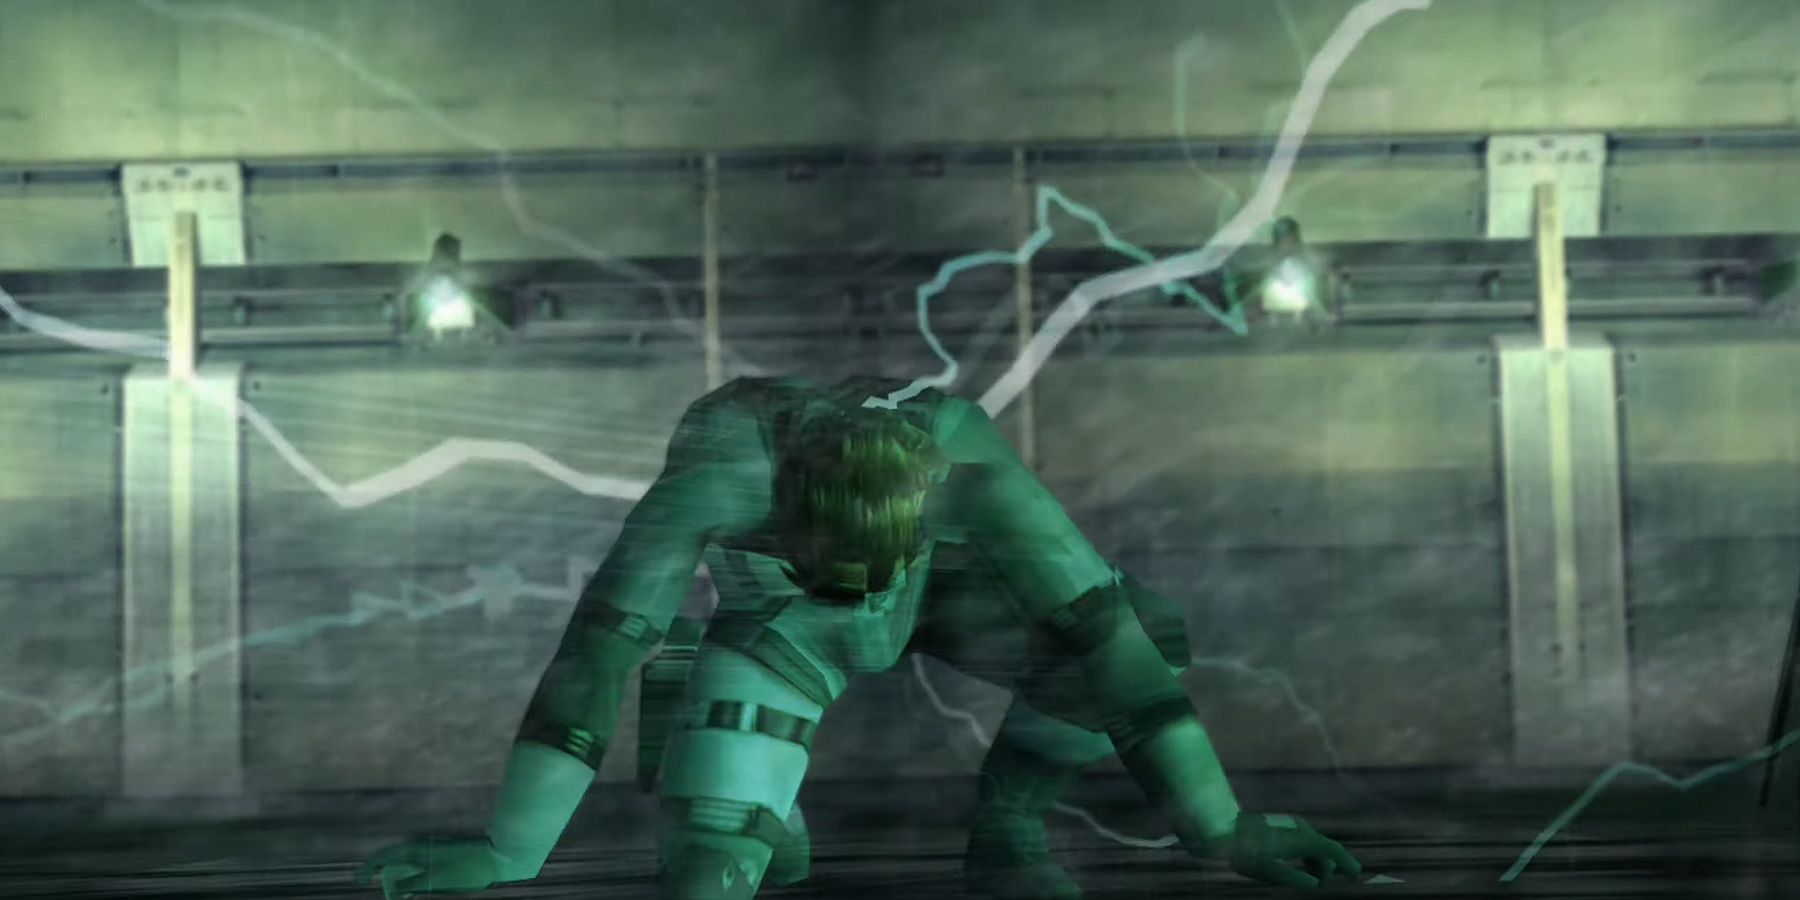 Image from the Metal Gear Solid 2 opening cutscene showing Solid Snake landing on the USS Discovery.